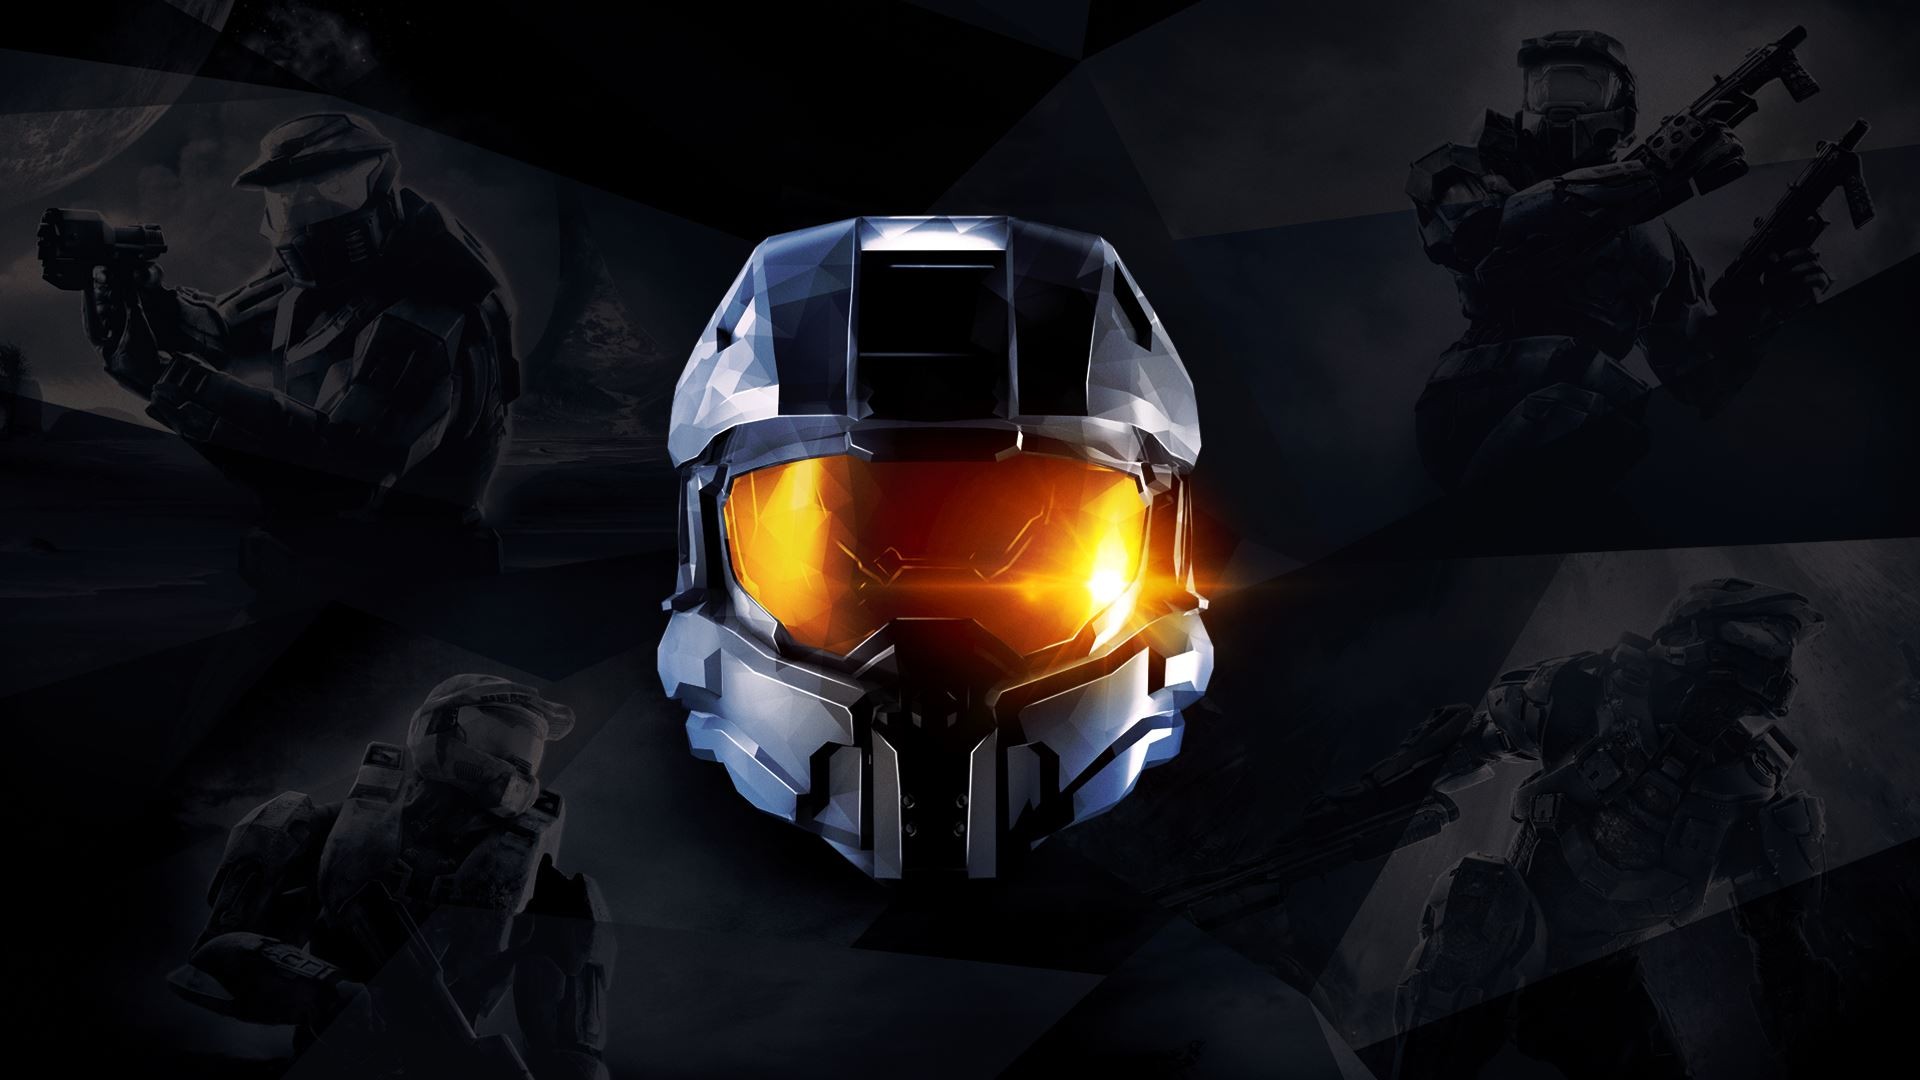 General 1920x1080 Halo (game) Halo 5 Halo: The Master Chief Collection Blue Team Master Chief (Halo) video game art science fiction video game characters helmet futuristic armor video games